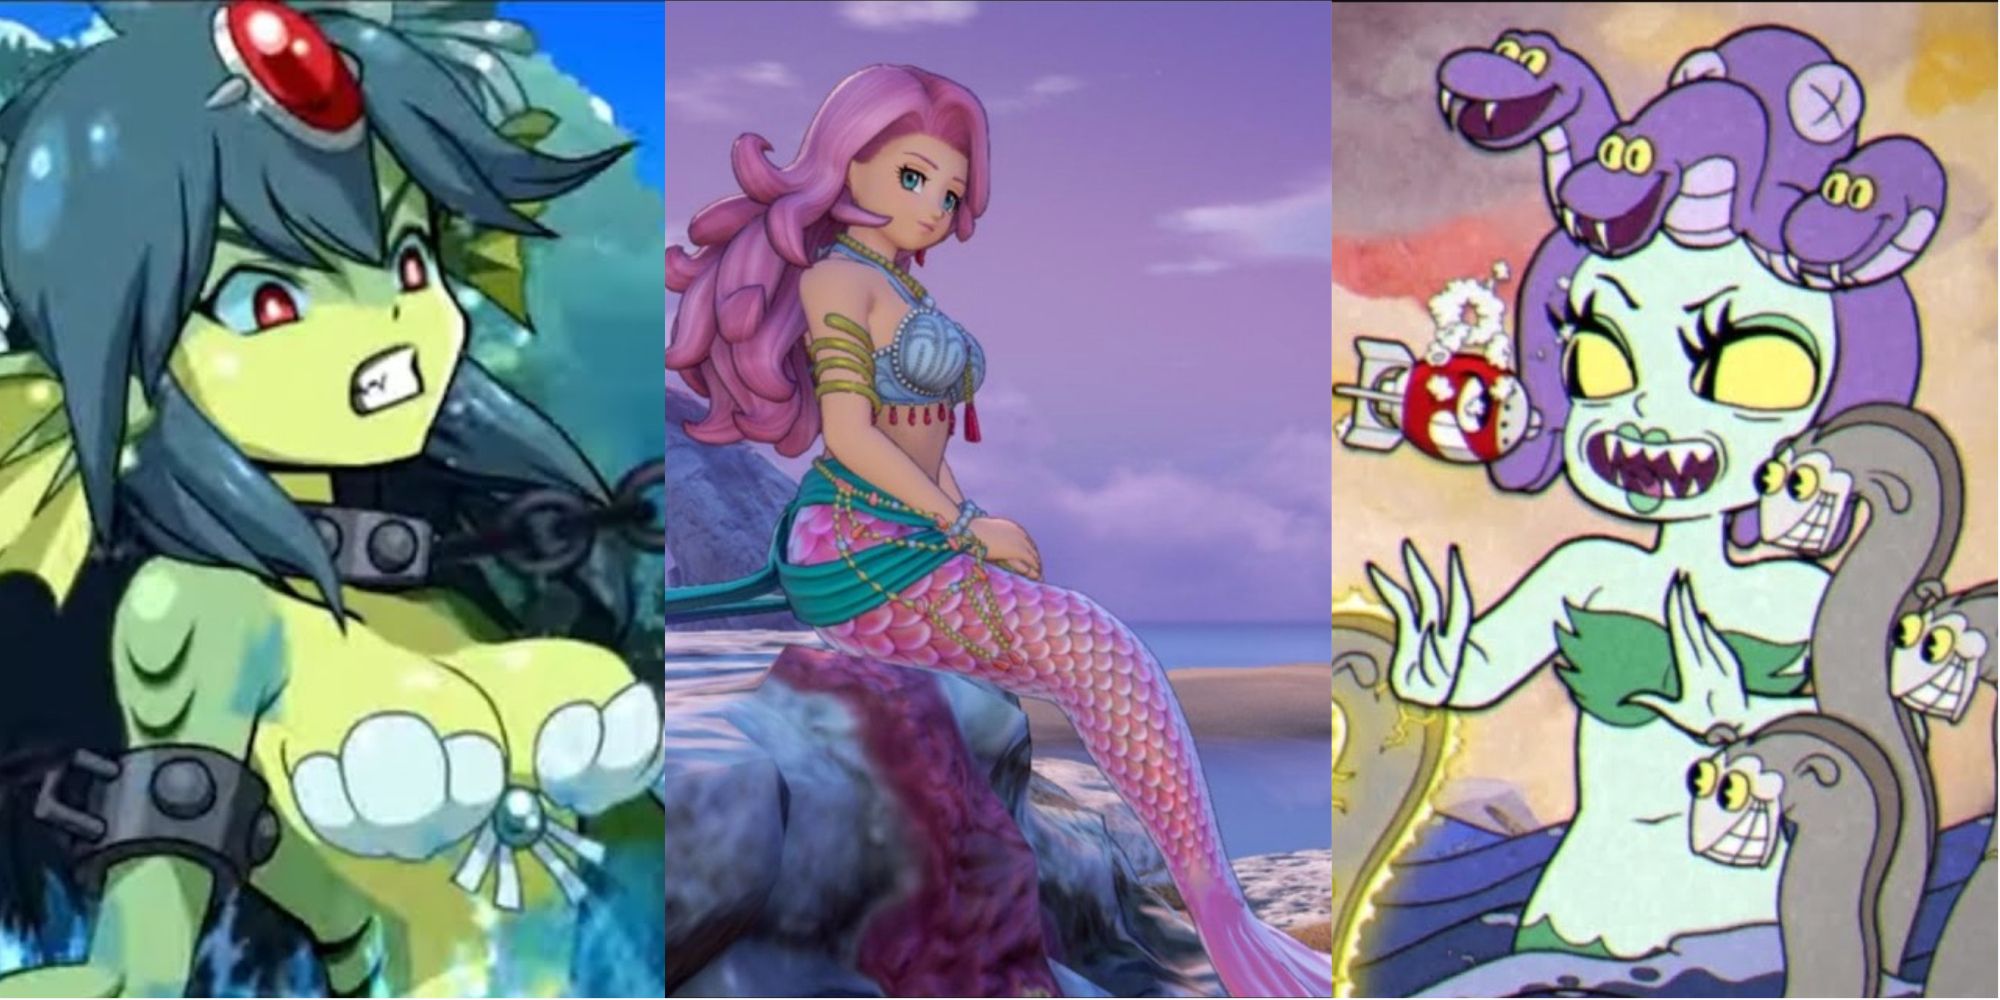 Giga Mermaid in Chains, Michelle sitting on a rock, Cala Maria in medusa form with her eels